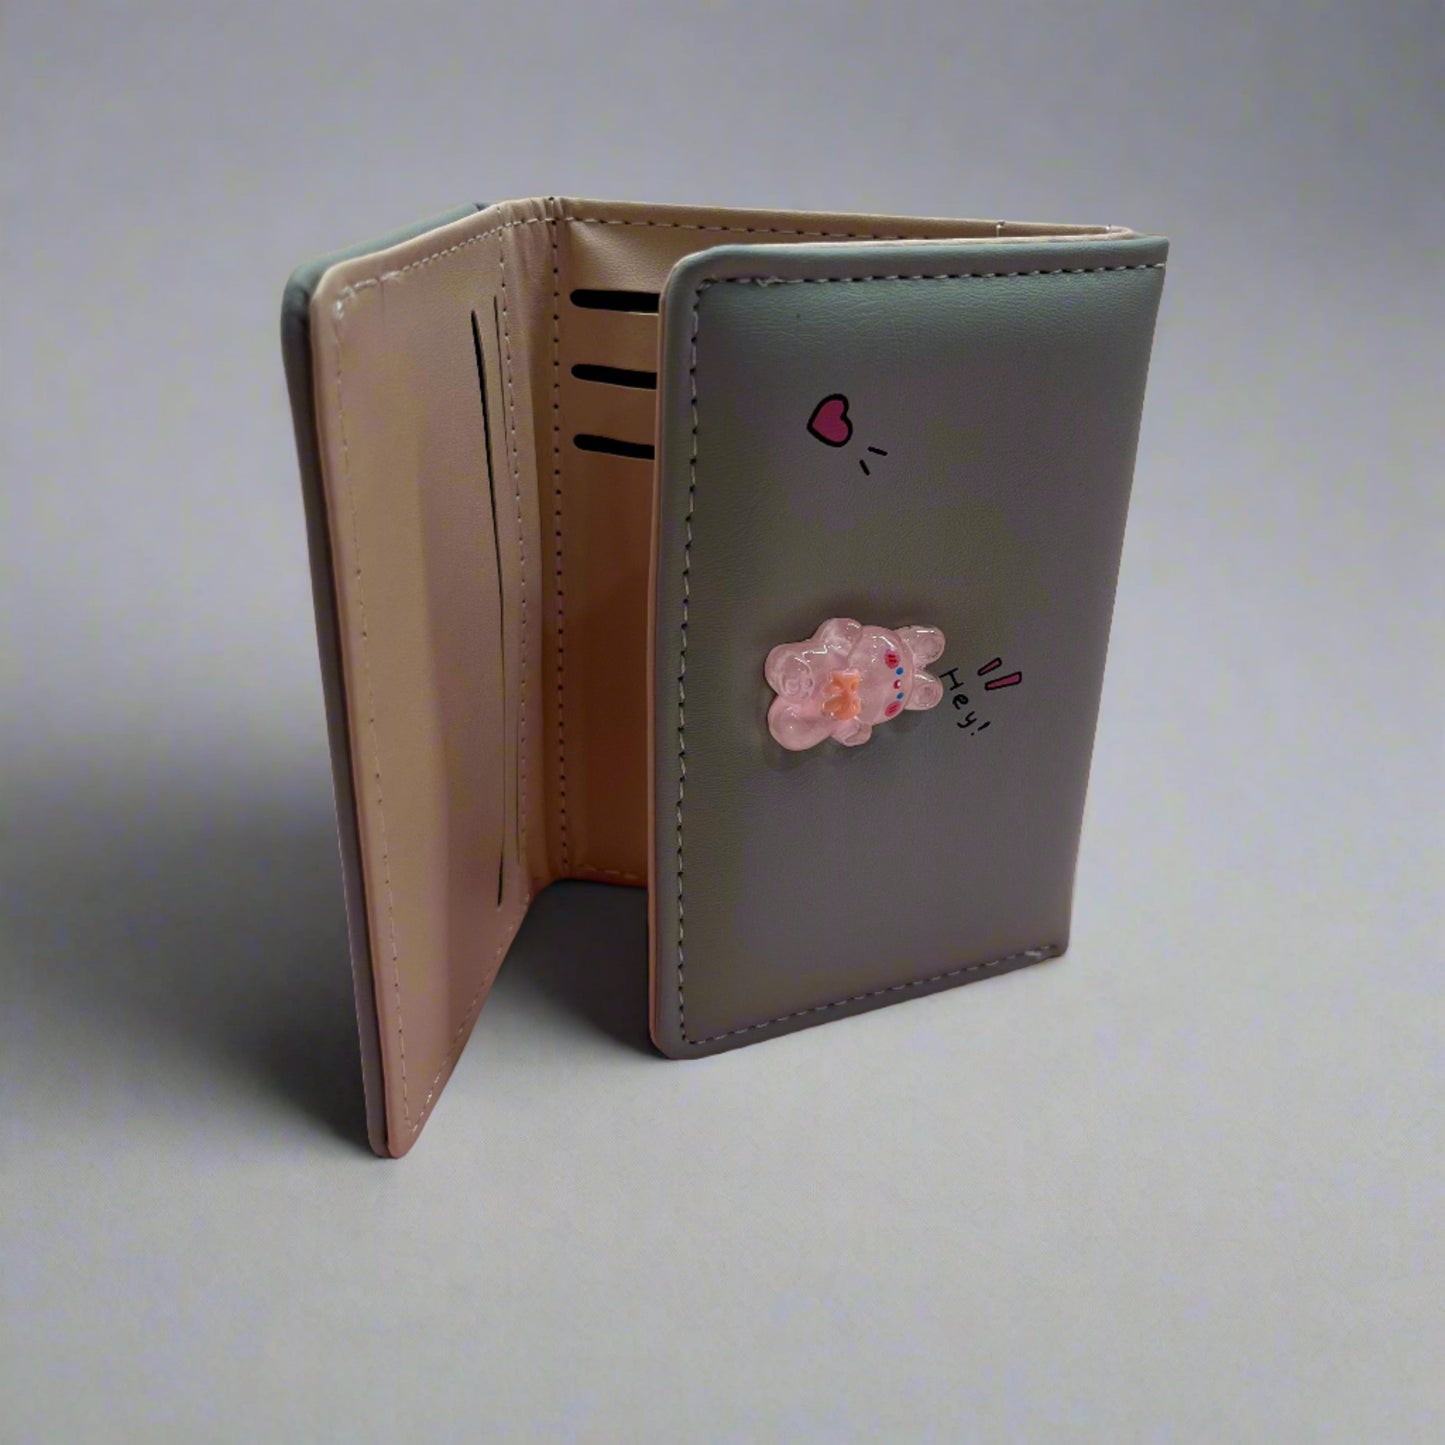 Small Size Wallets with card Holder wallet for women and girls